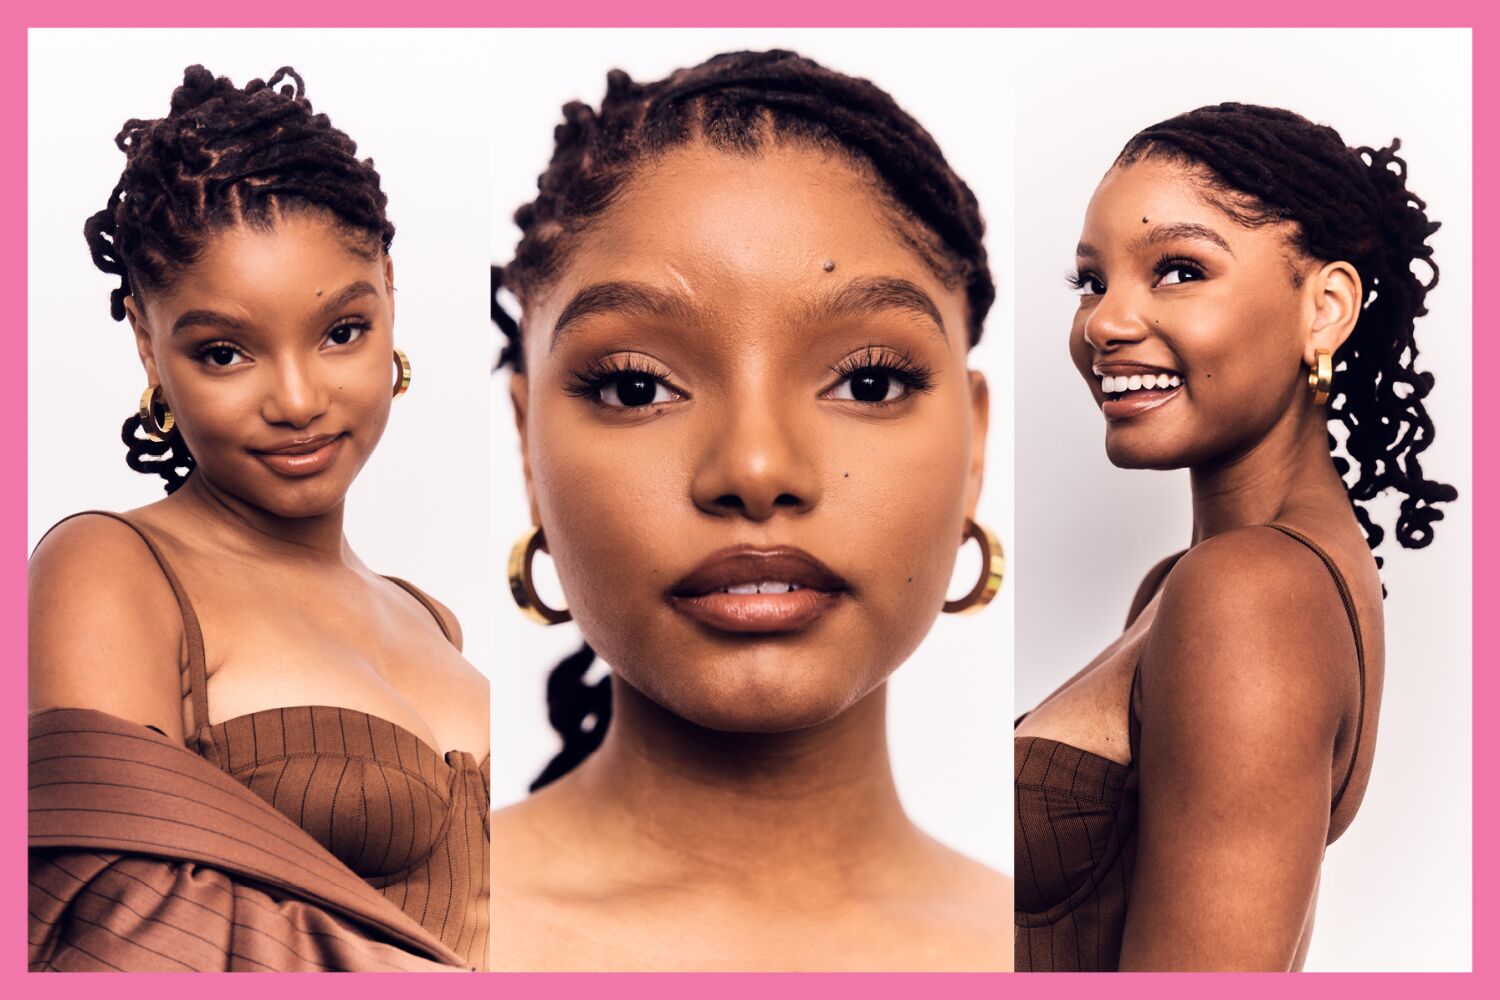 'The Little Mermaid' left Halle Bailey 'tired' and 'isolated.' And she thanked God for it